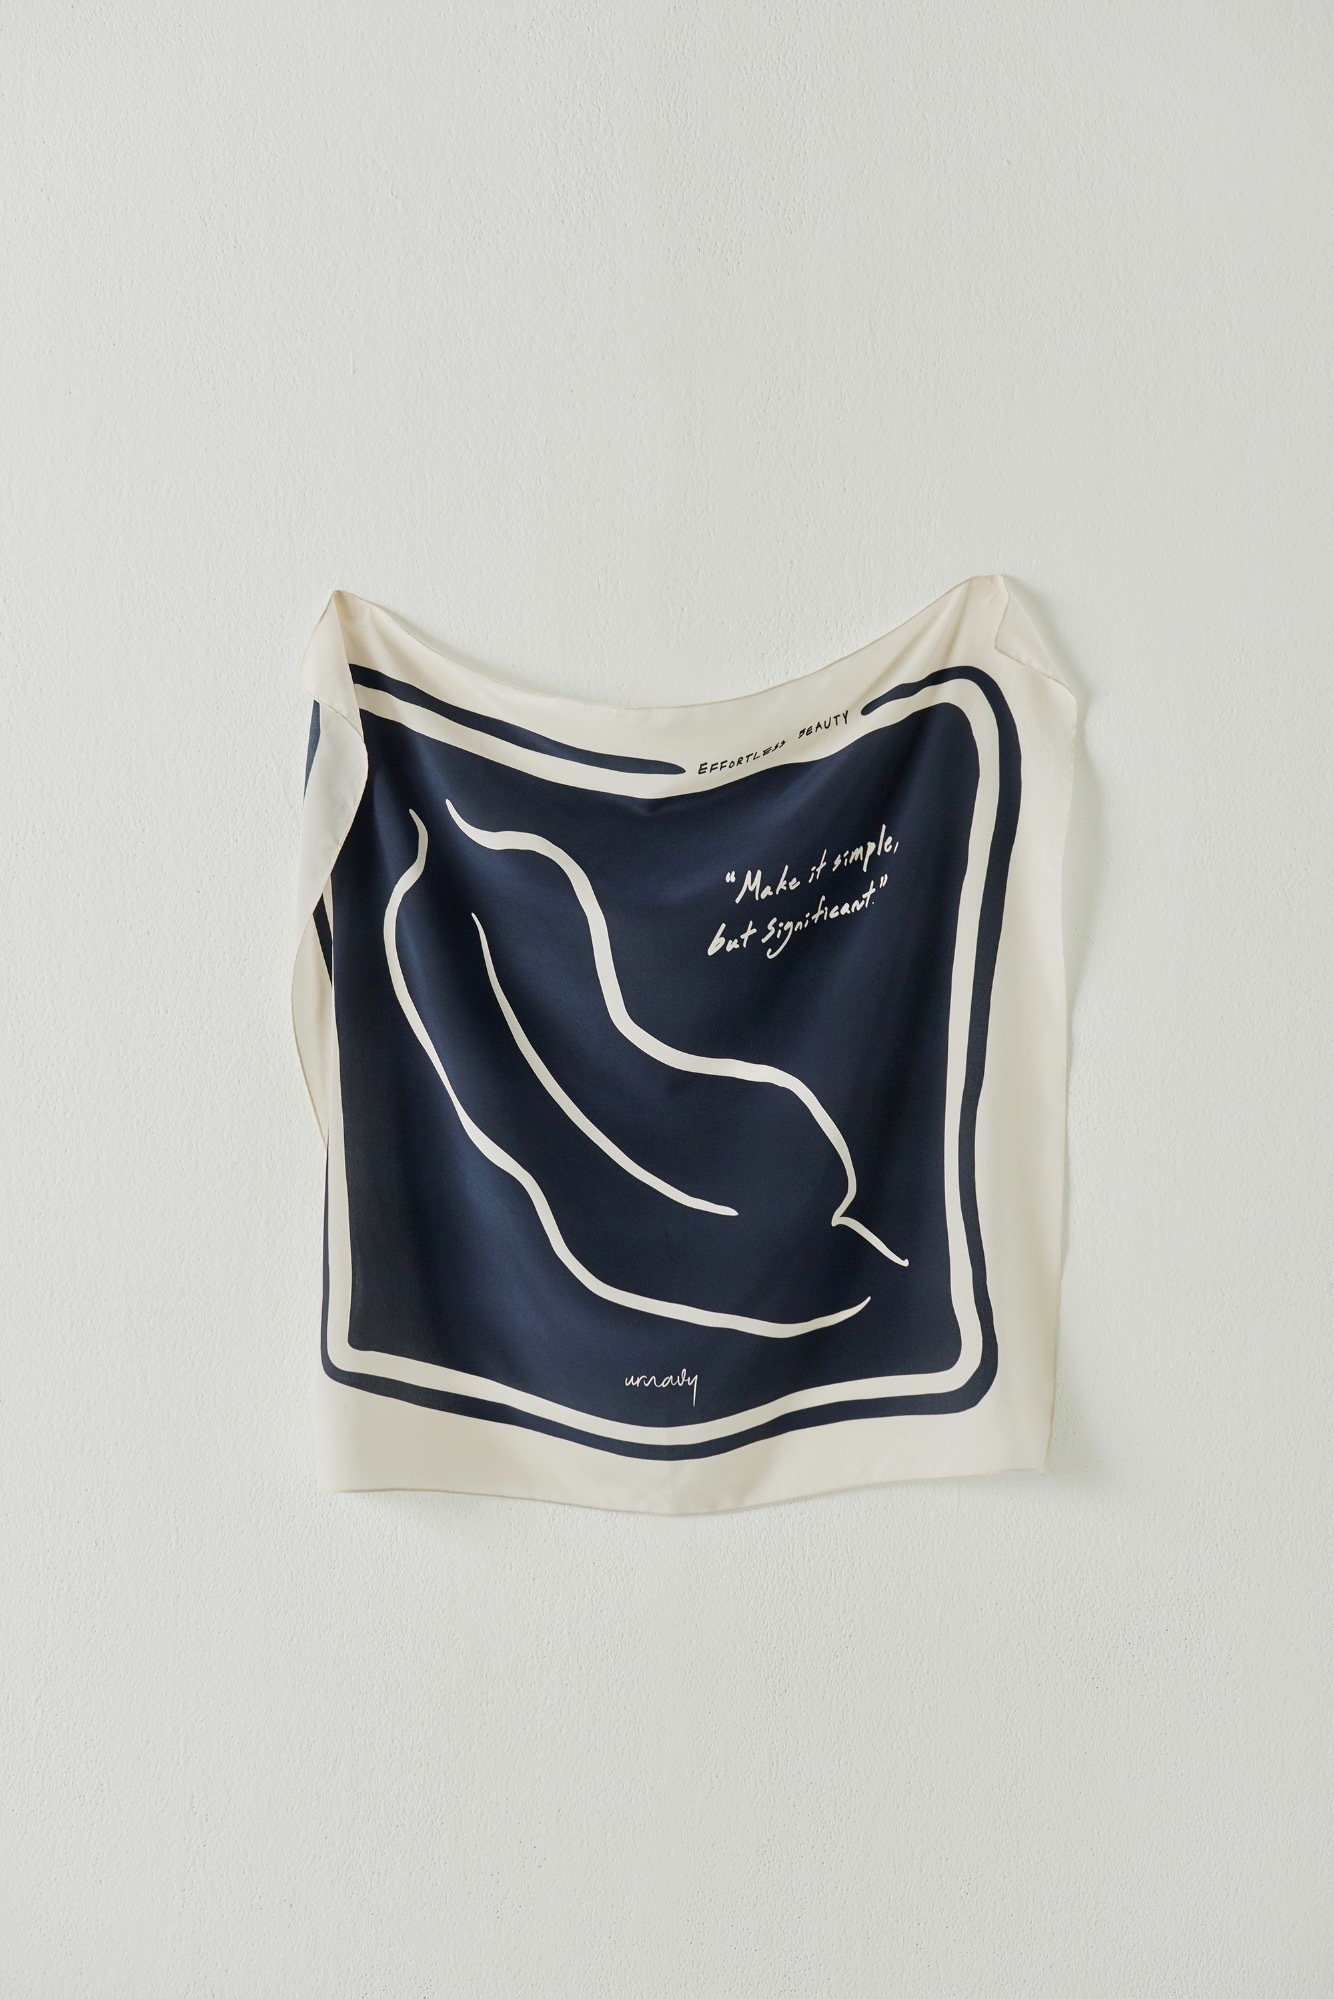 [Sold Out] Effortless beauty Art scarf - Navy